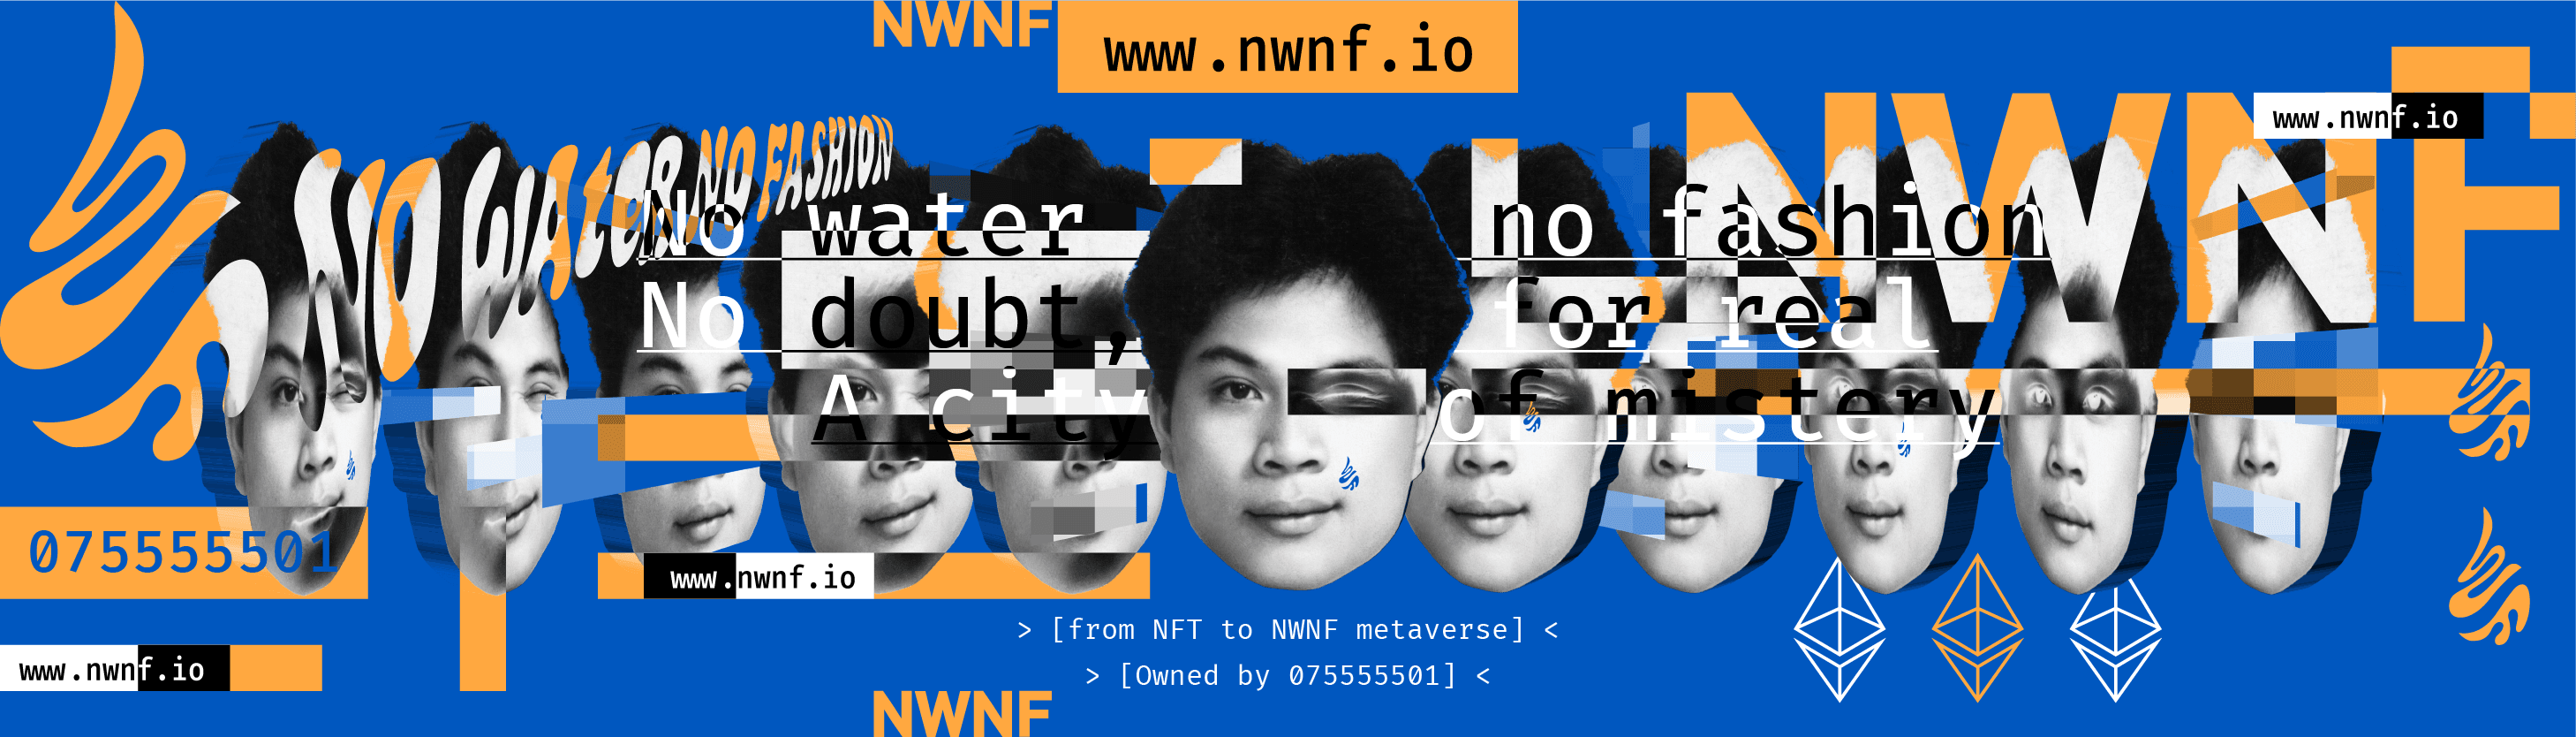 NWNF バナー